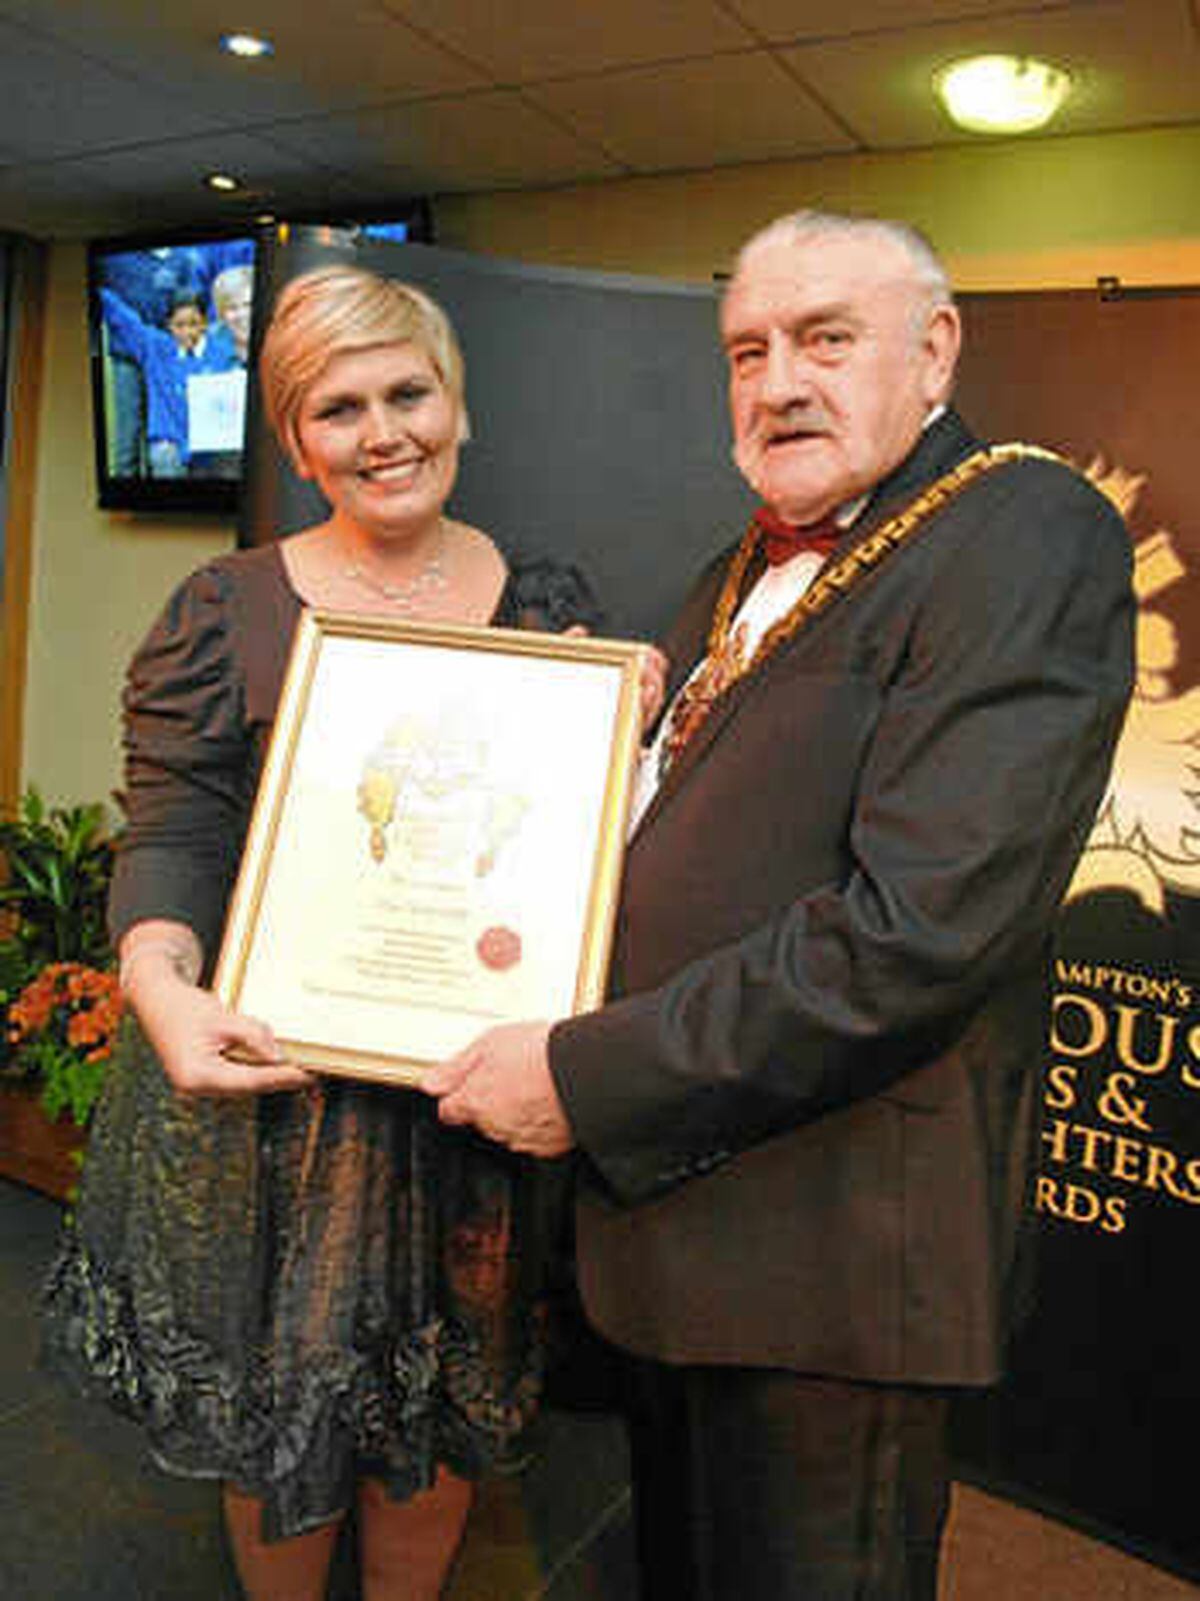 Heroine Lisa Potts is presented with an award by Bert Turner during his time as Mayor